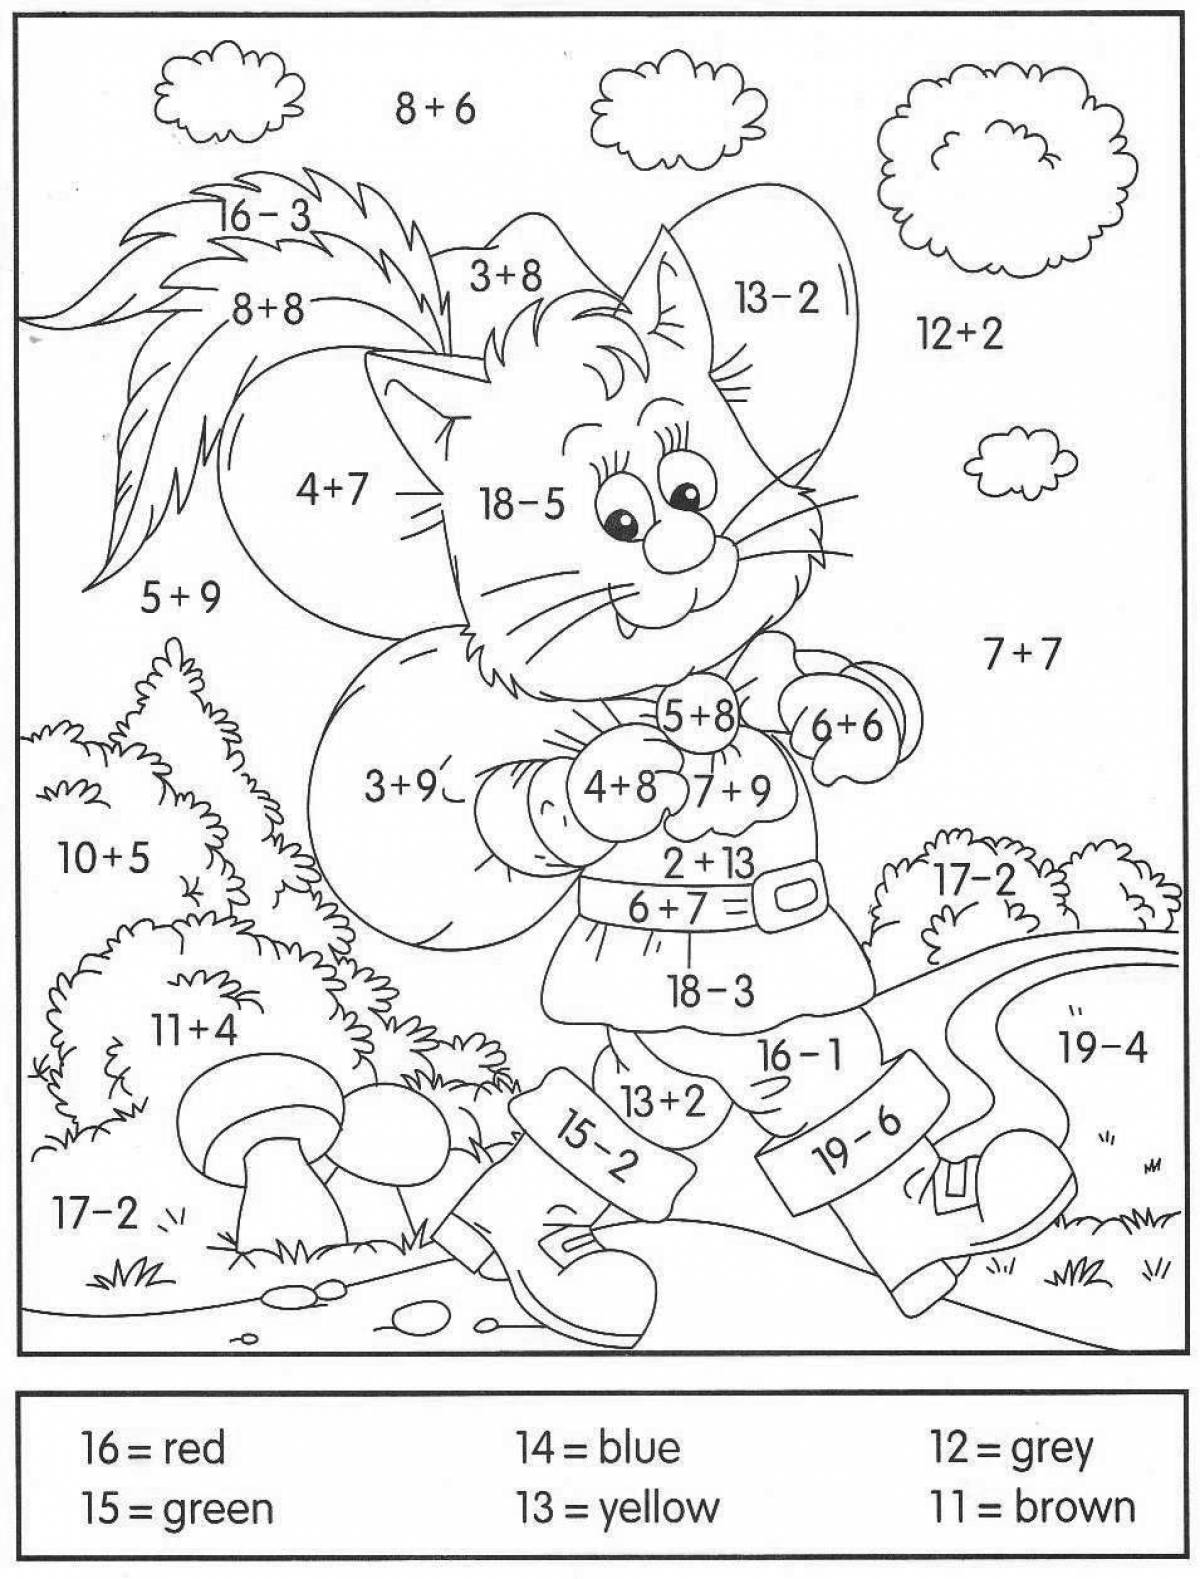 Crazy coloring book for first graders with tasks